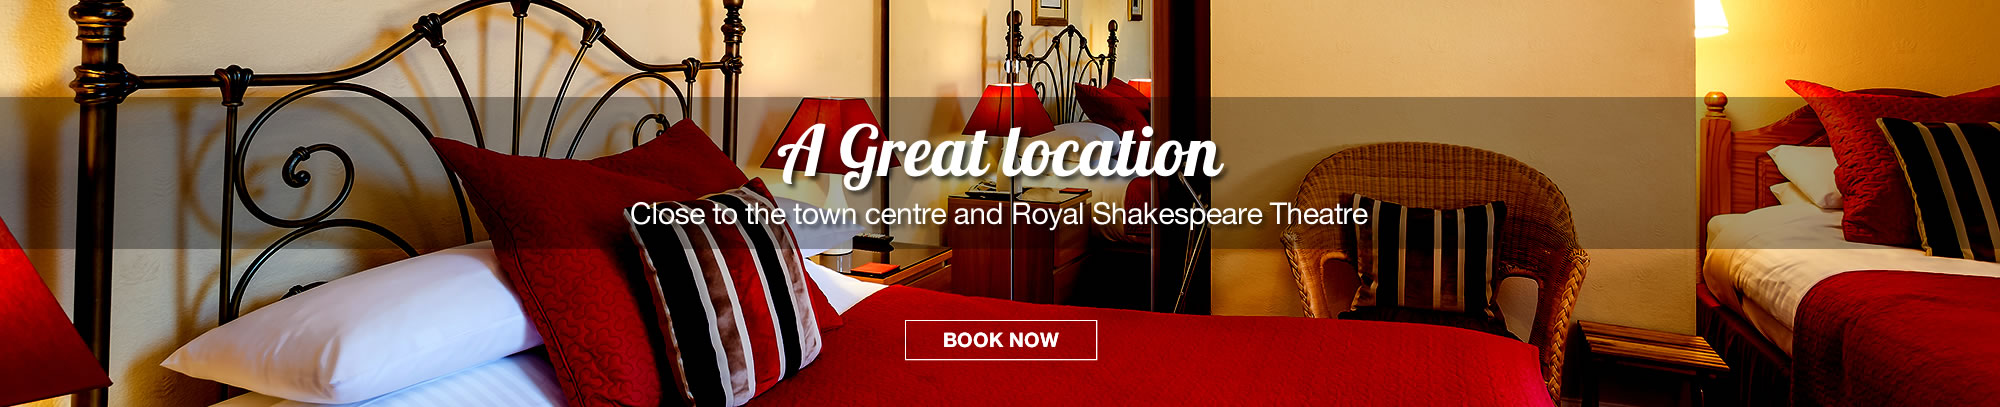 Ashgrove House - A Great location close to the town centre and Royal Shakespeare Theatre